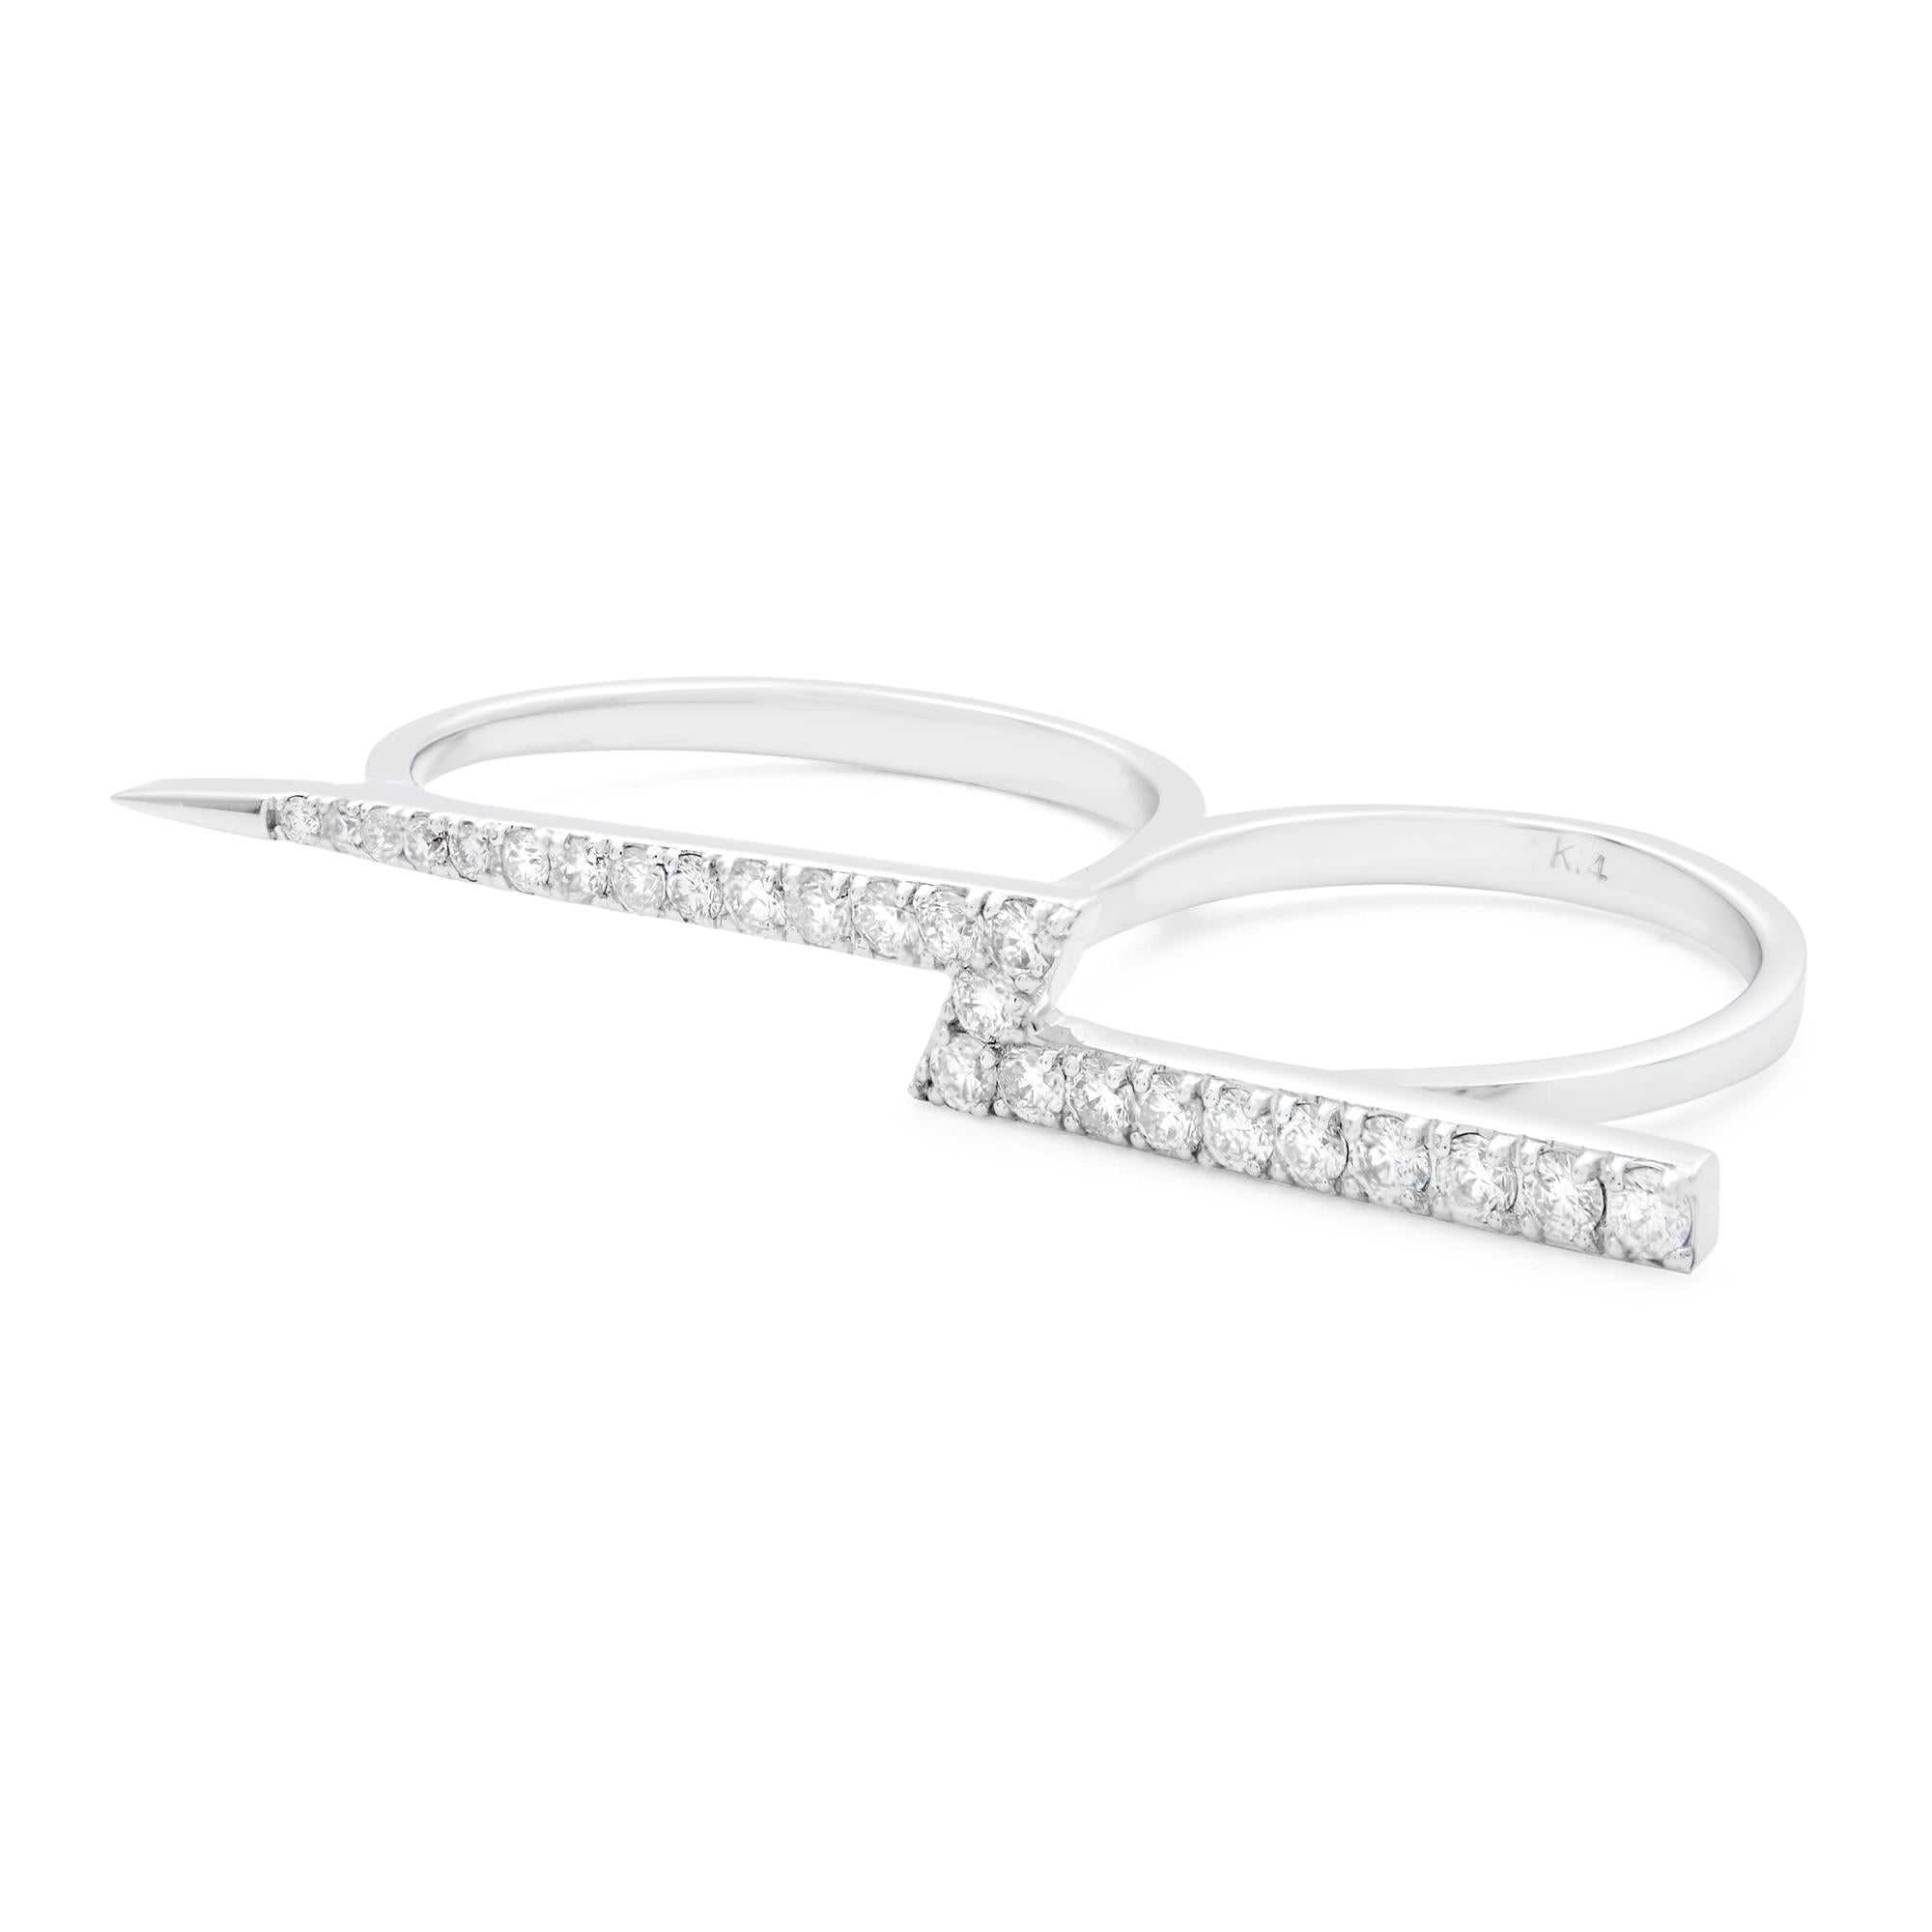 14k white gold trendy two finger ladies ring. Crafted in 14k white gold. Total diamond carat weight: 0.54. Diamond color G and SI-VS clarity.  Finger size 4 and 7. Comes with a presentable gift box. 